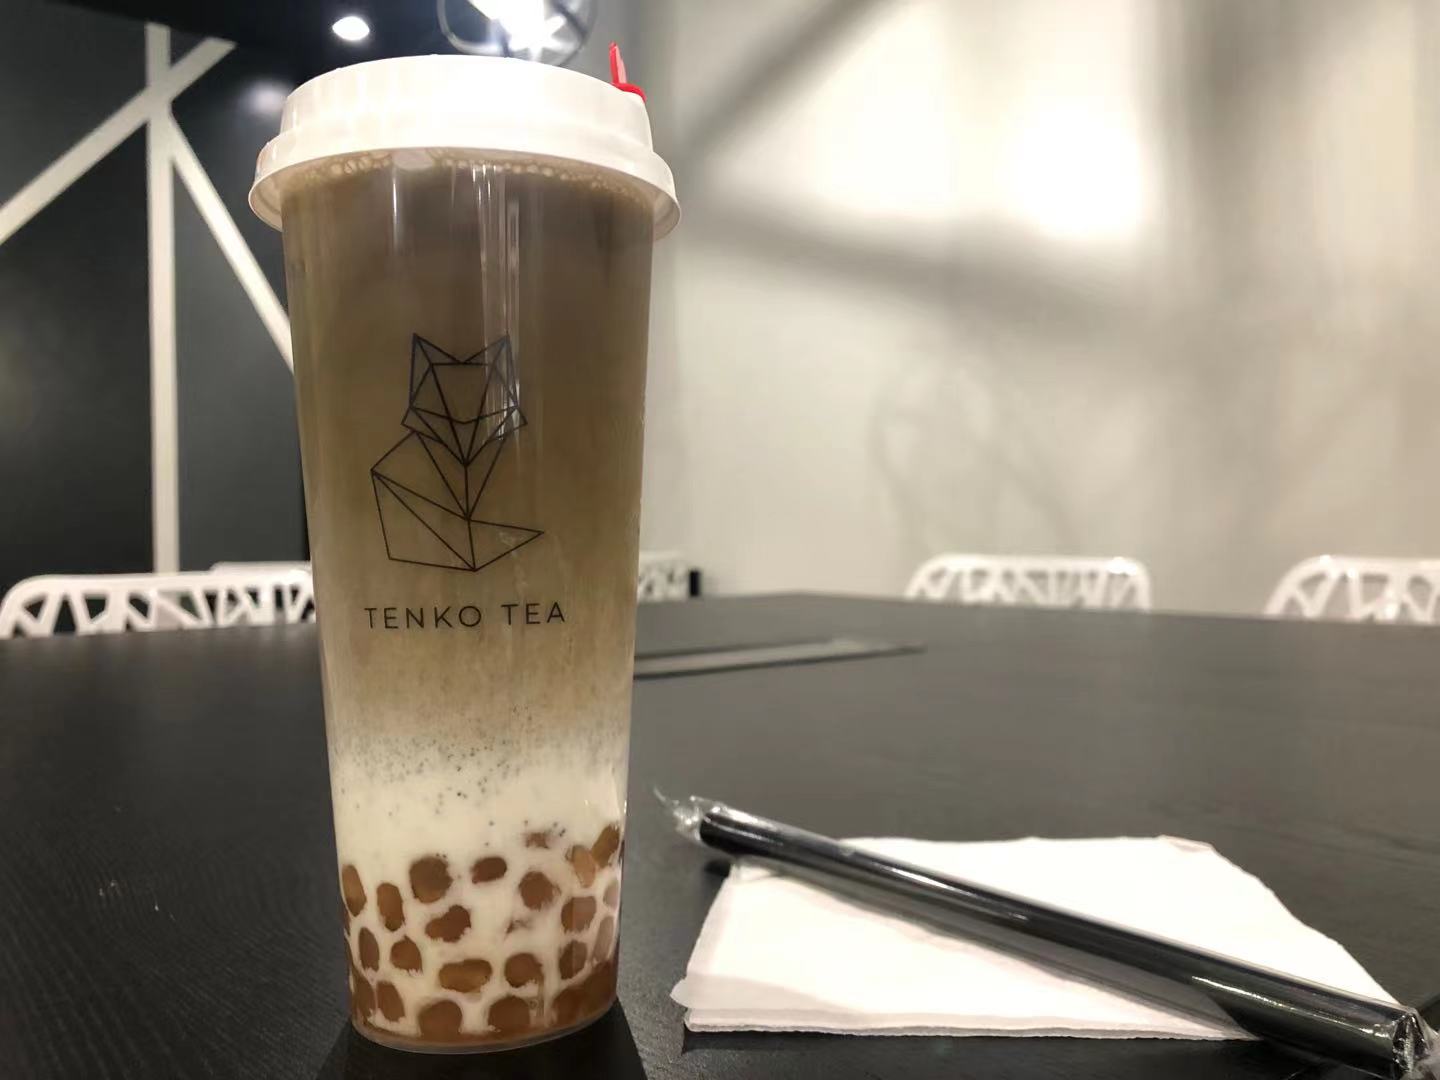 On a black table, there is a plastic cup of boba tea with Tenko Tea and the fox on the outside. Beside the cup is a white square napkin and black plastic straw wrapped in plastic. Photo by Xiaohui Zhang.